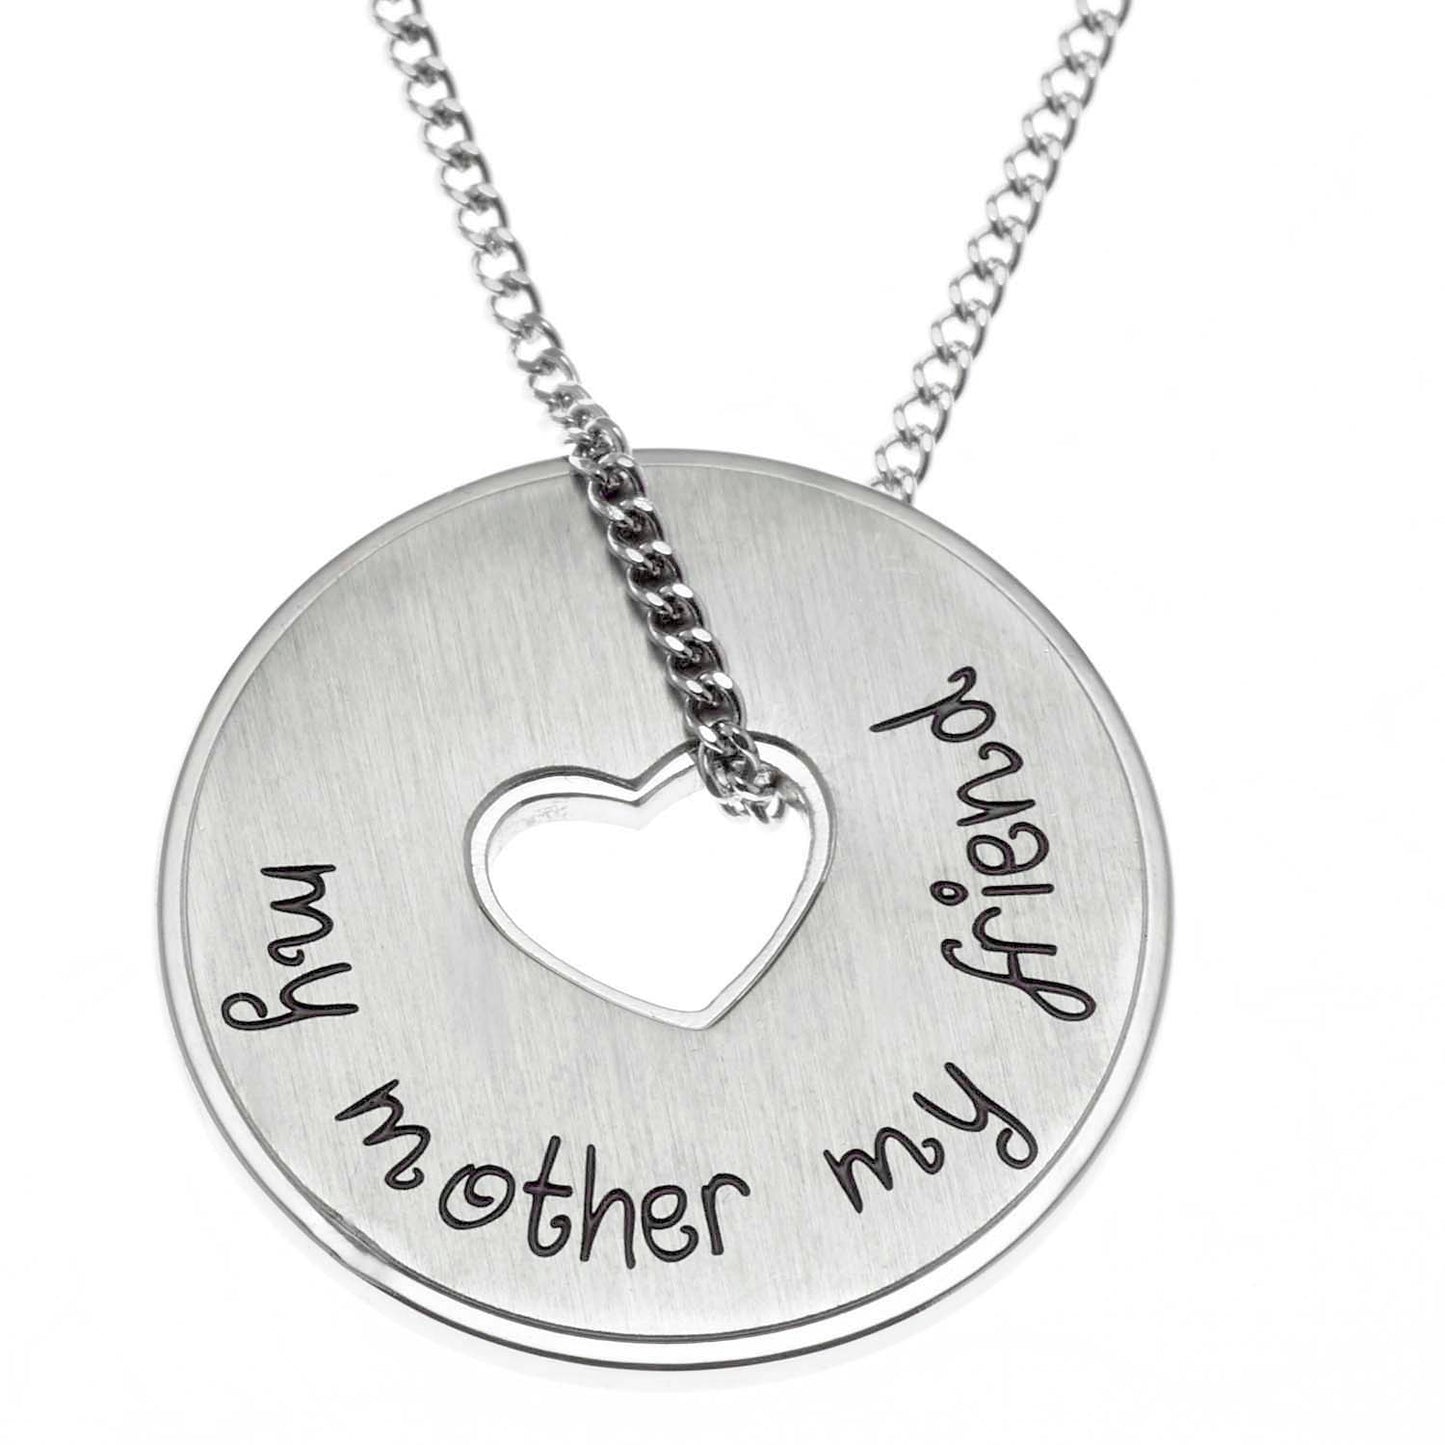 Heartfelt "My Mother, My Friend" Engraved Disc Pendant Necklace, Perfect Sentimental Mother's Day or Birthday Gift